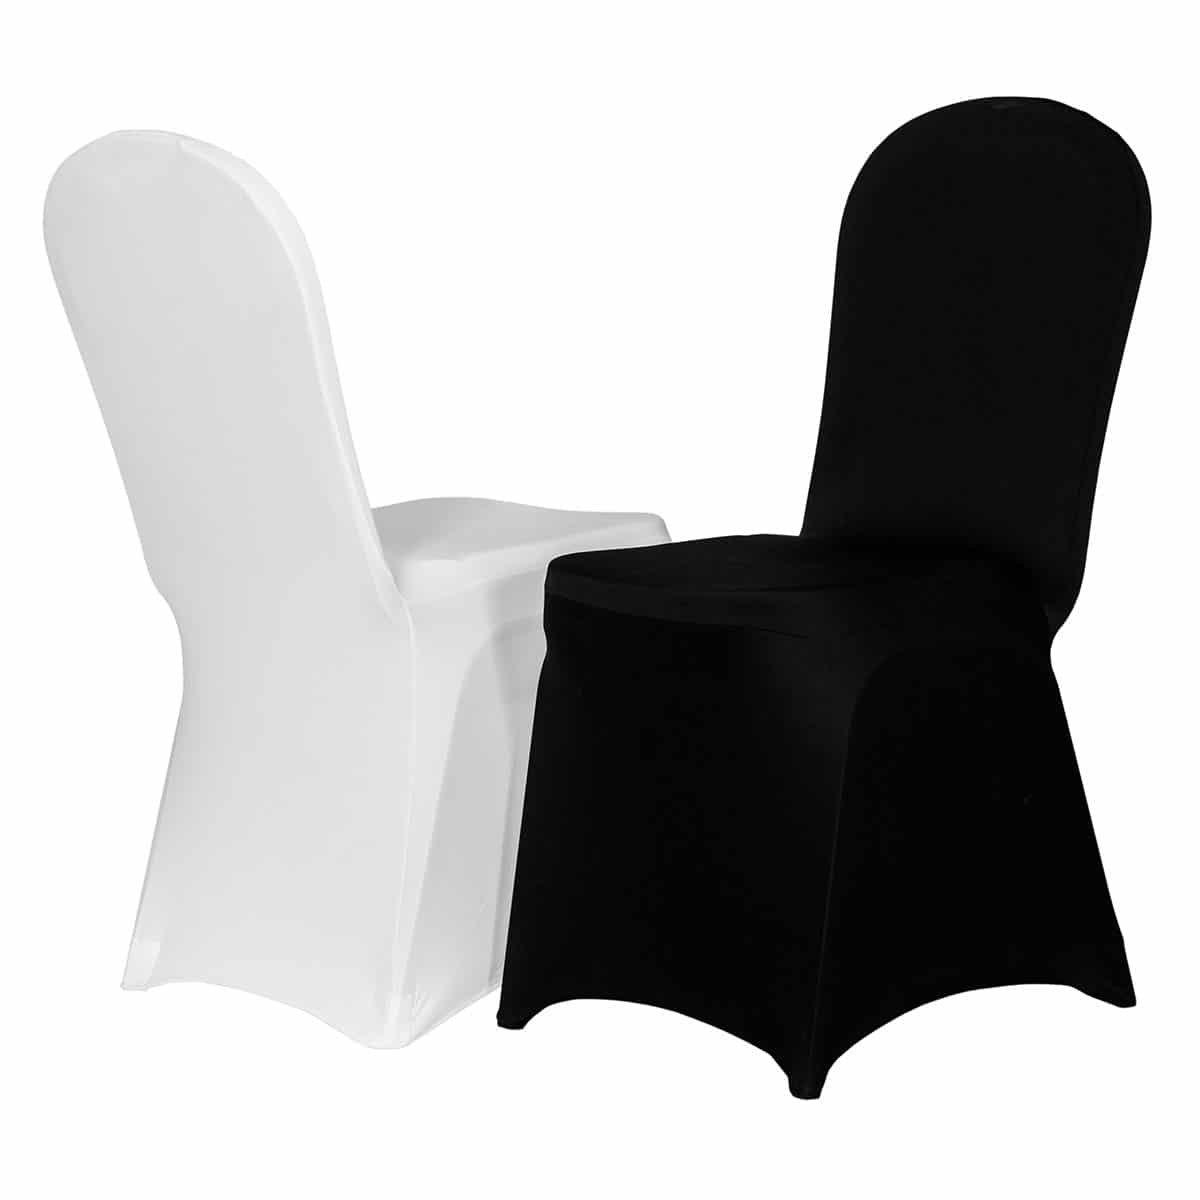 Banquet Chair Cover Universal Chairs